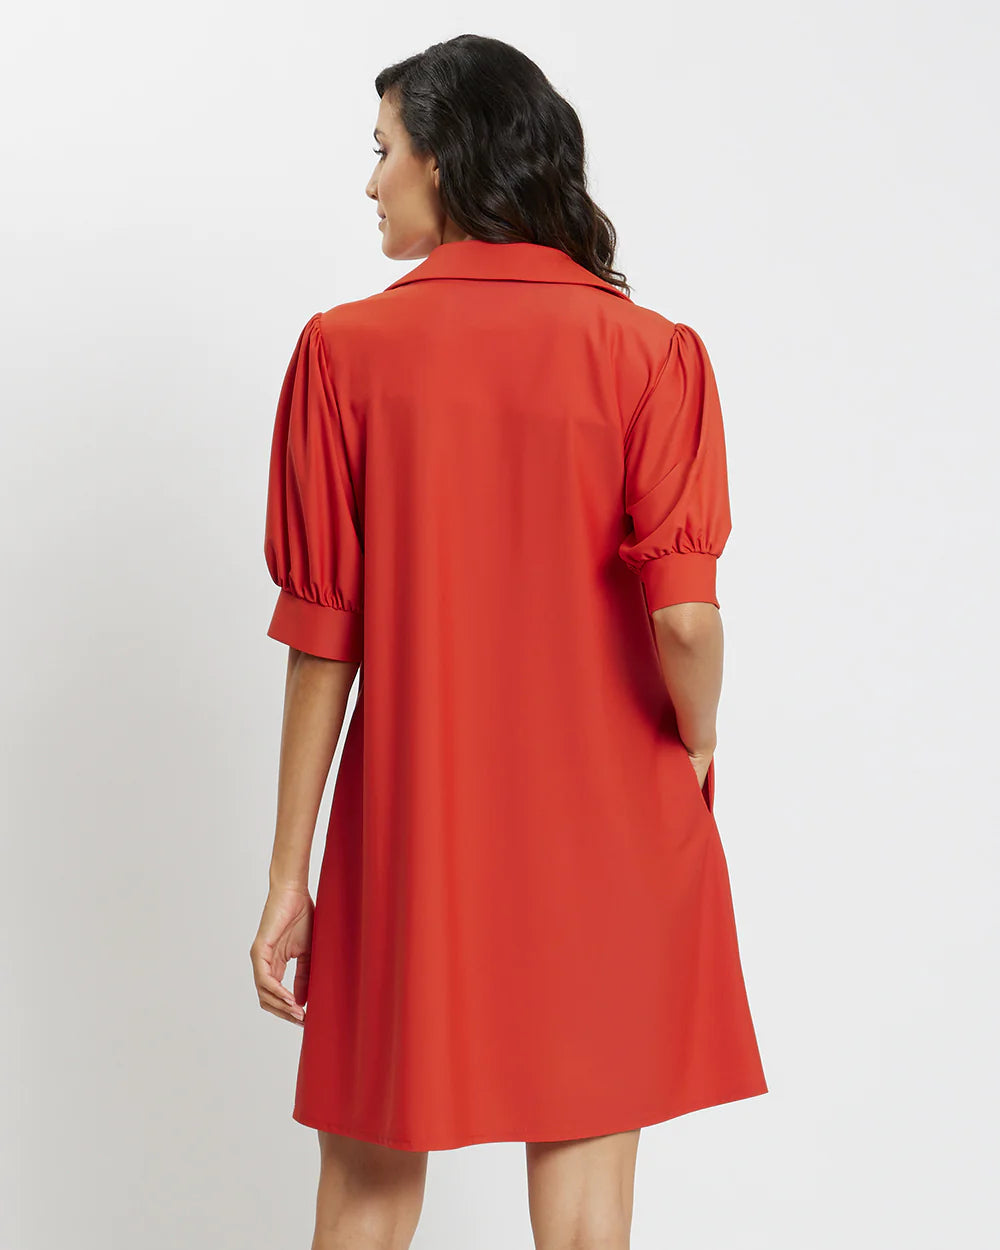 Jude Connally Emerson Dress Jude Cloth in Paprika